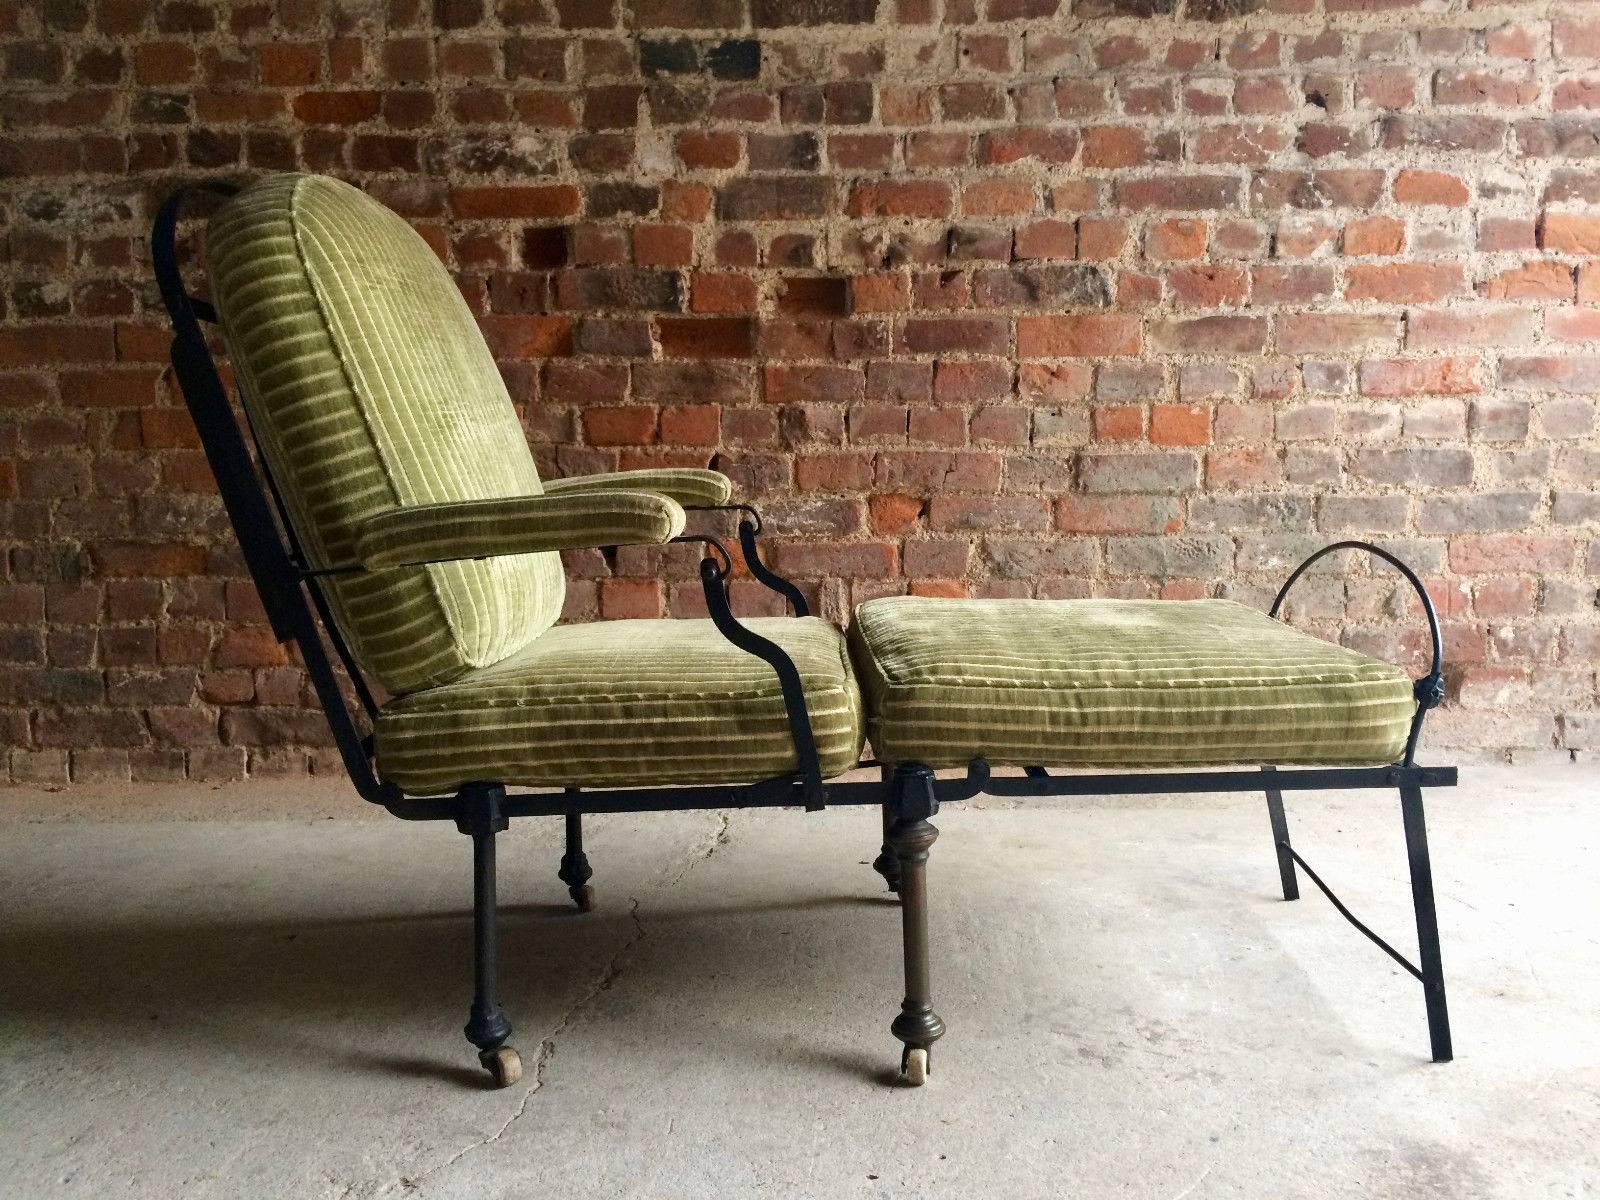 A fabulous 19th century and later, Campaign fold out daybed chair, black cast iron frame with green velvet upholstery, raised on casters, converts into a chair or bed, extremely stylish and very comfortable.